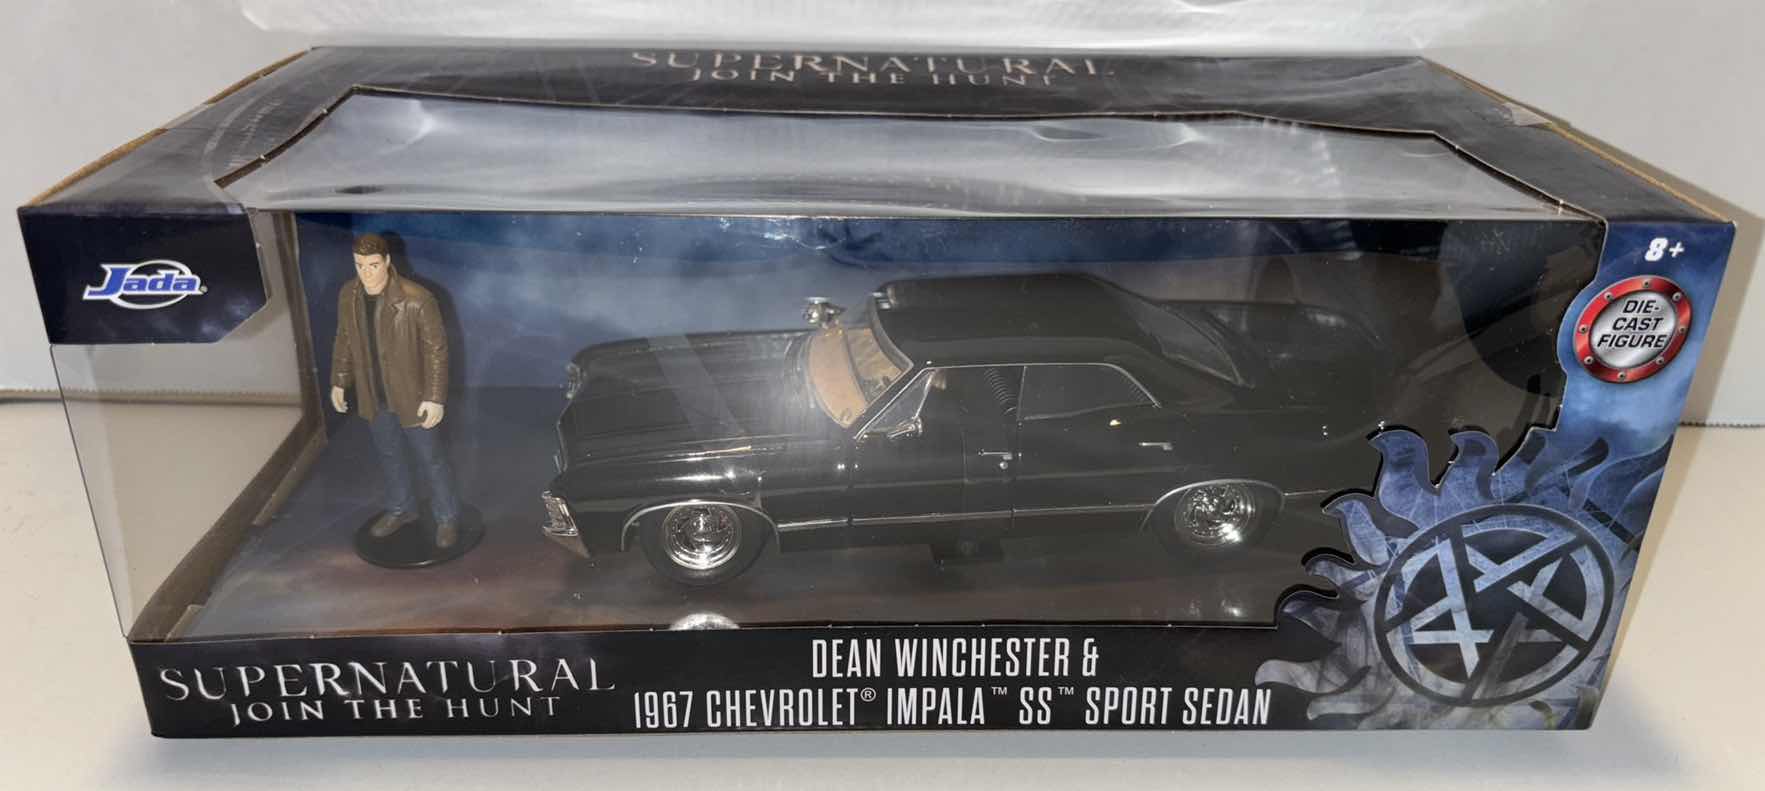 Photo 2 of NEW JADA TOYS HOLLYWOOD RIDES DIE-CAST VEHICLE & FIGURE, SUPERNATURAL JOIN THE HUNT “DEAN WINCHESTER & 1967 CHEVROLET IMPALA SS SPORT SEDAN”